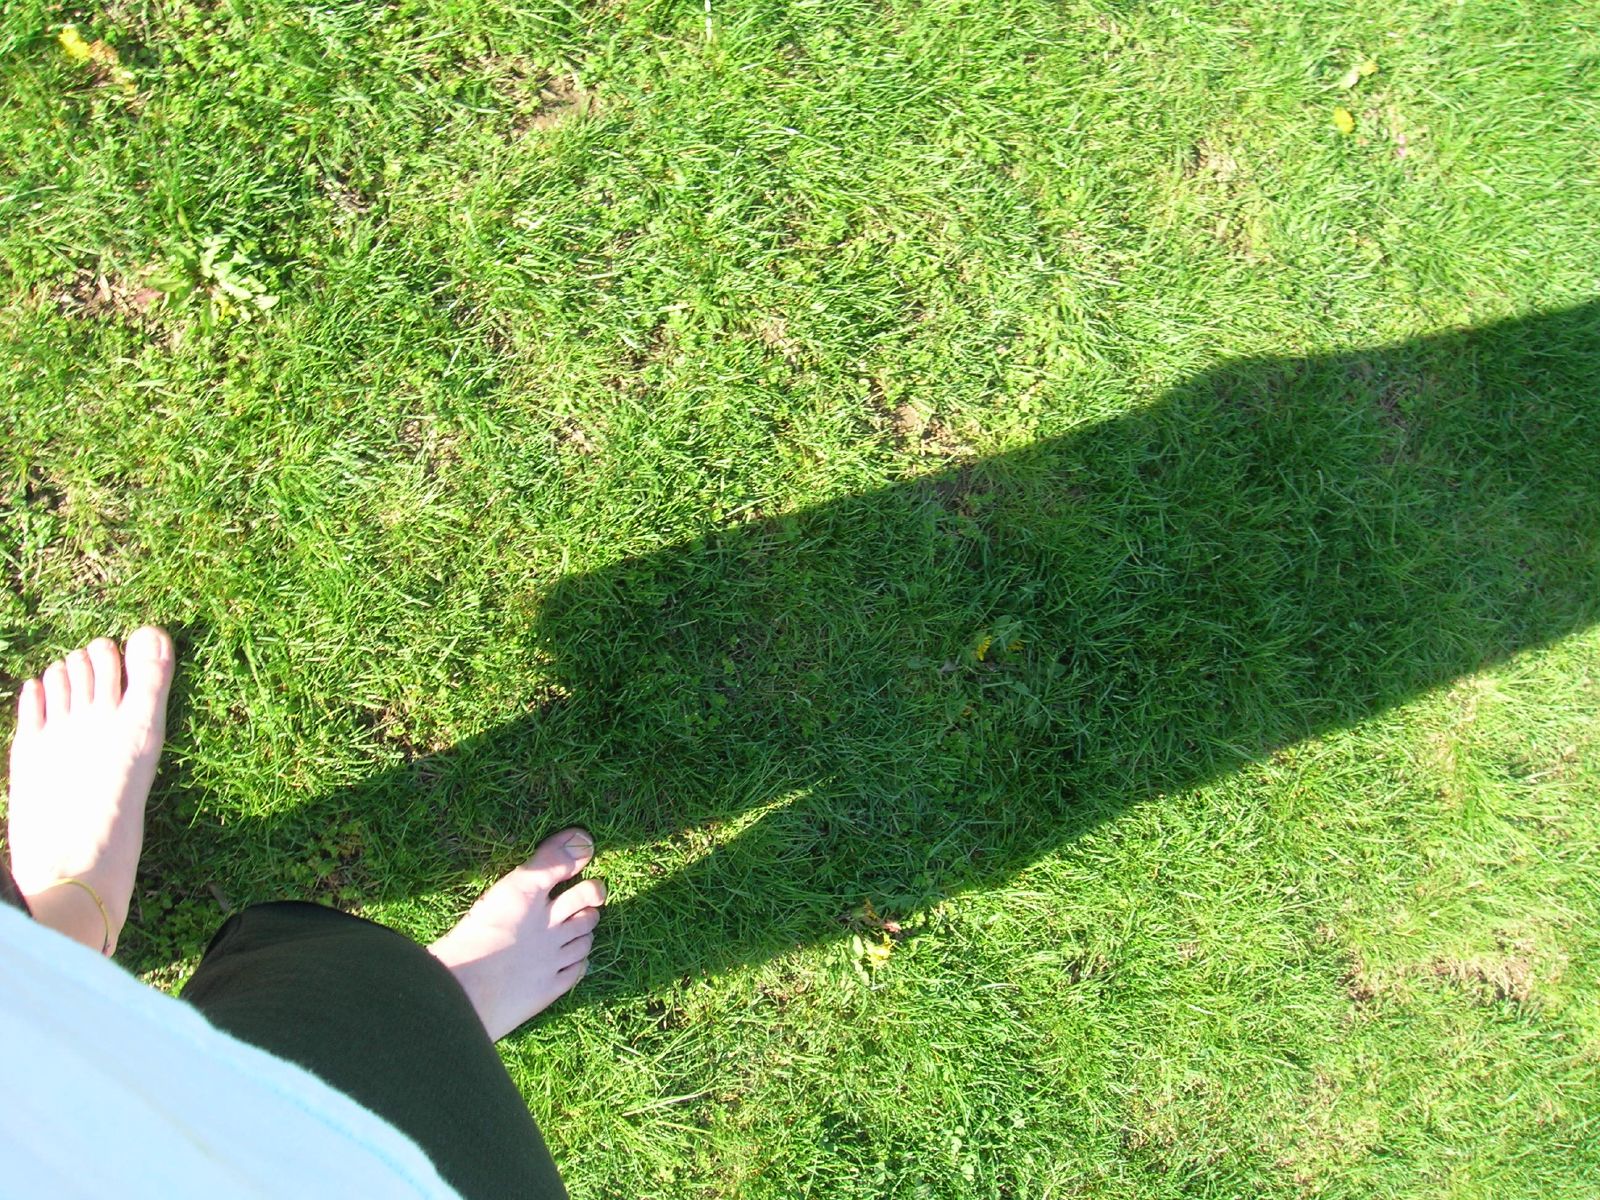 person in shadow standing on a grassy area